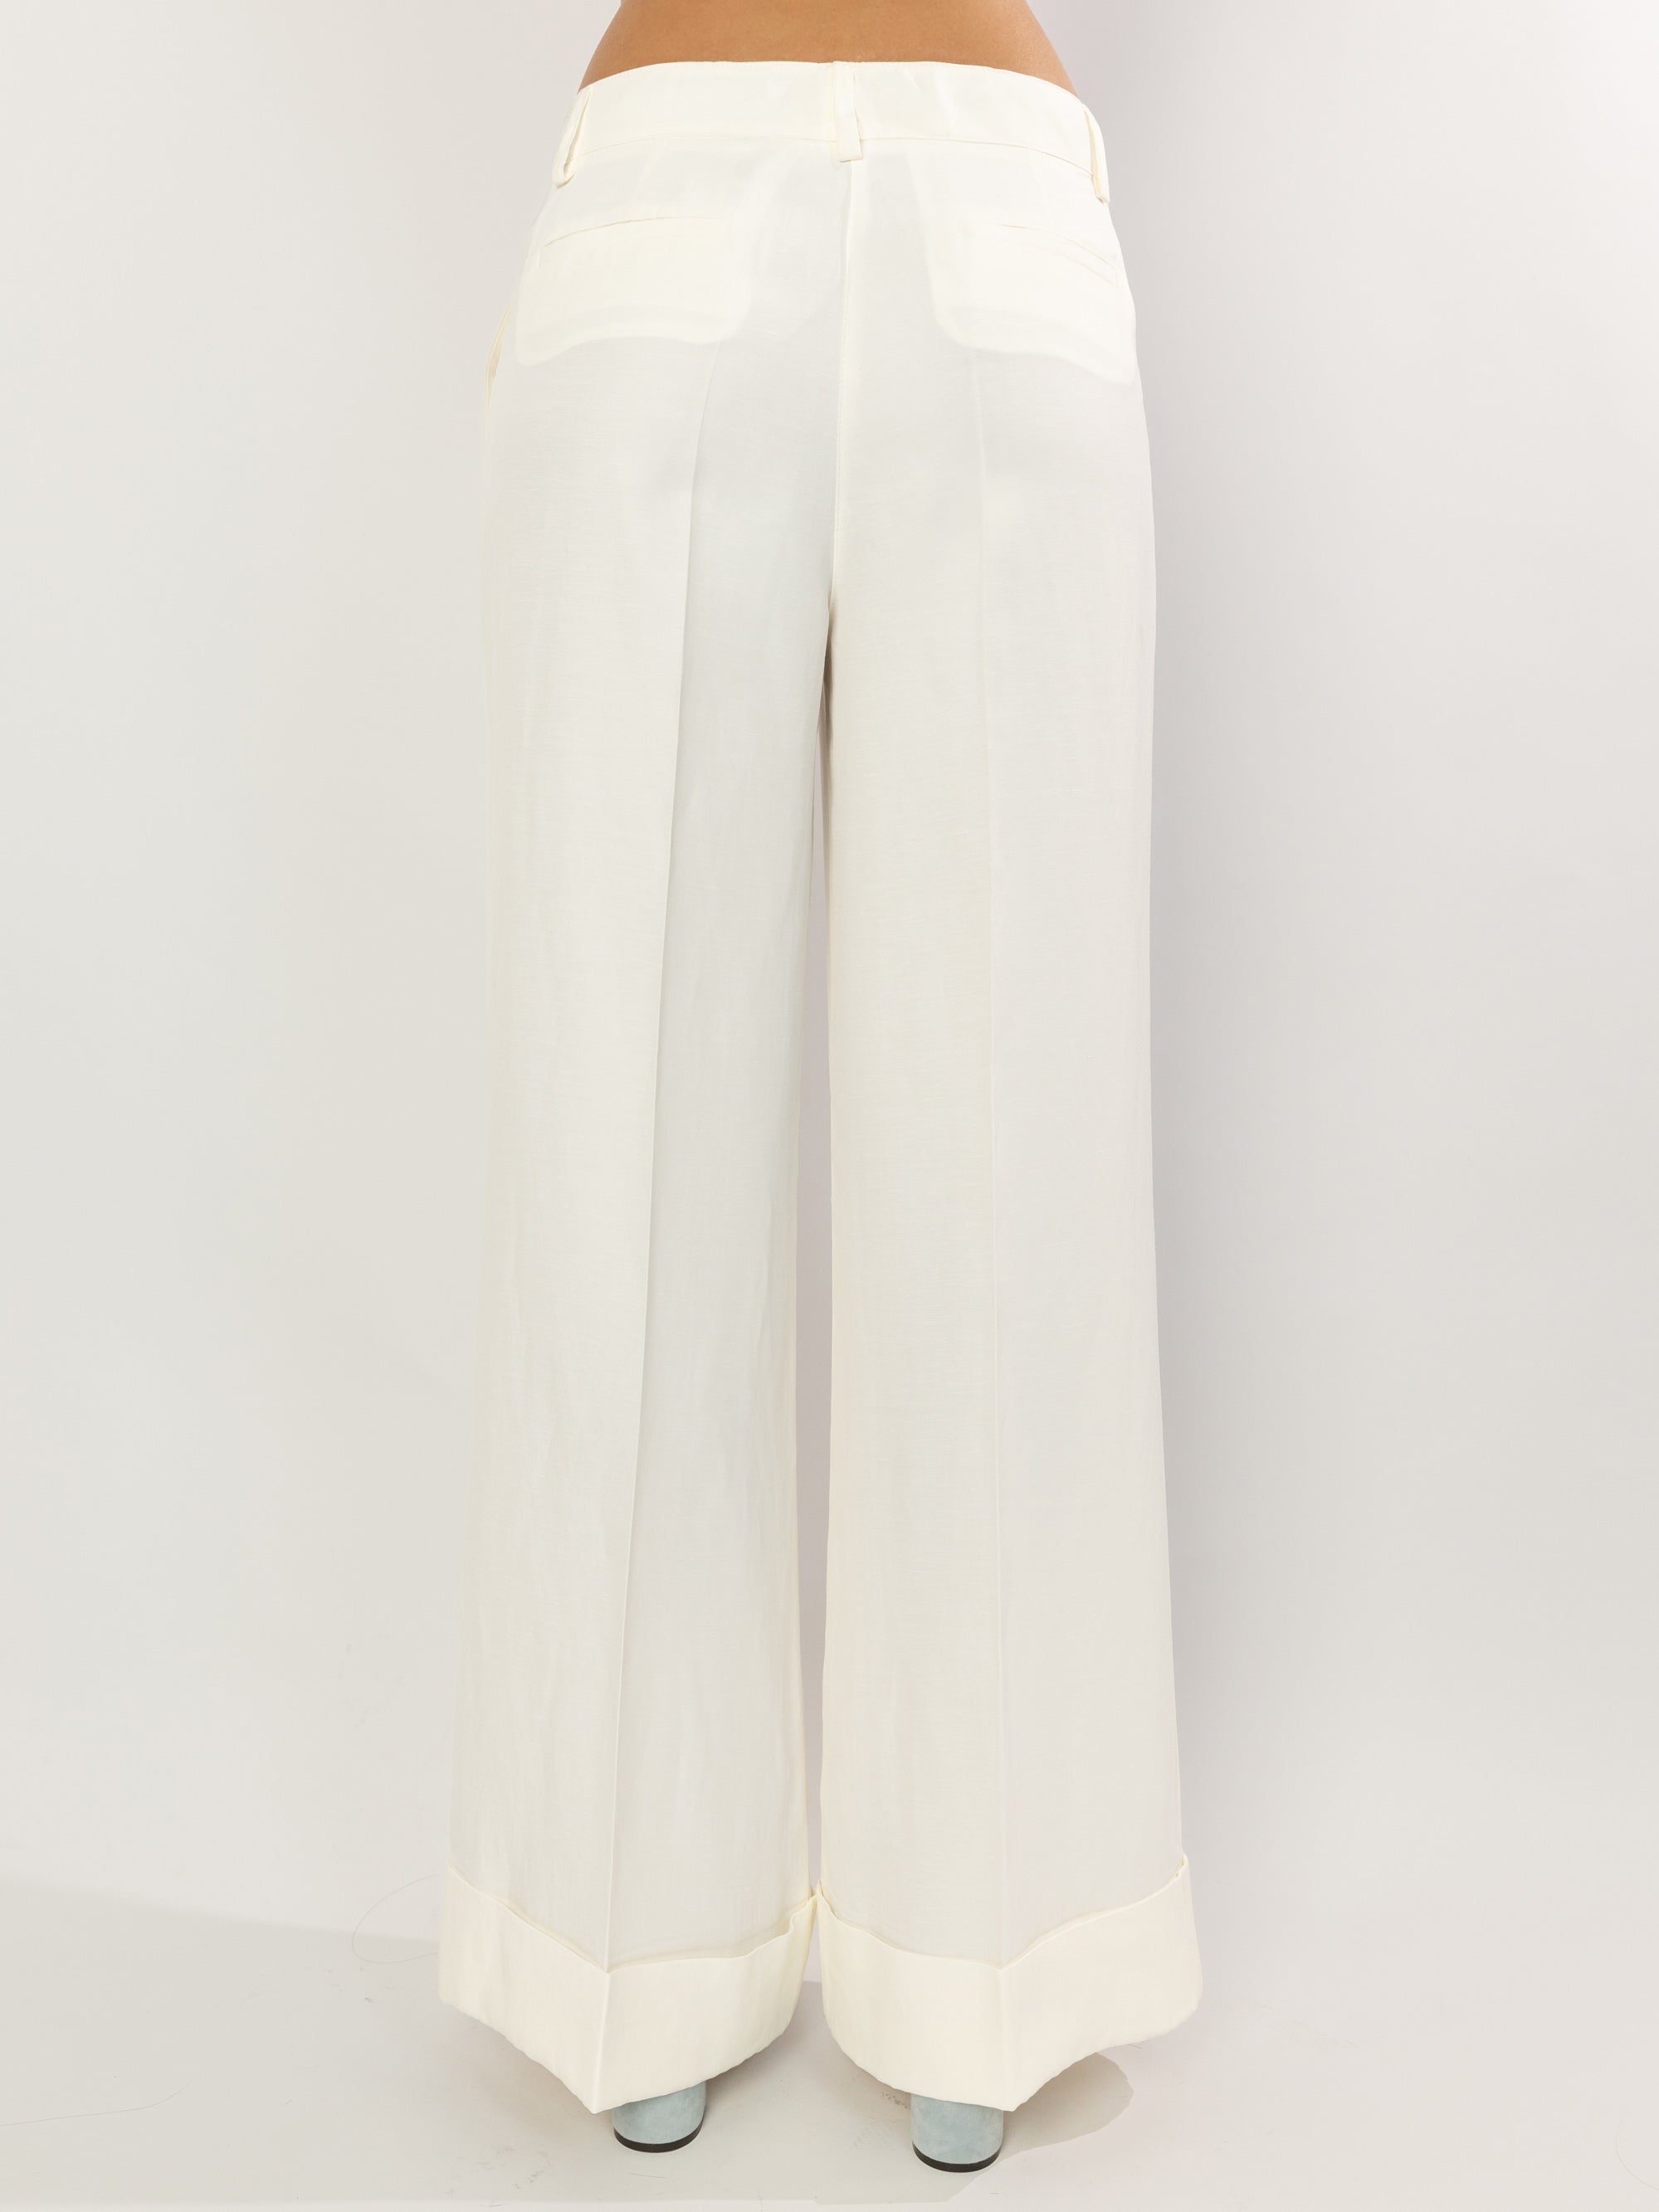 Palazzo Pants in Linen with Cream Cuff